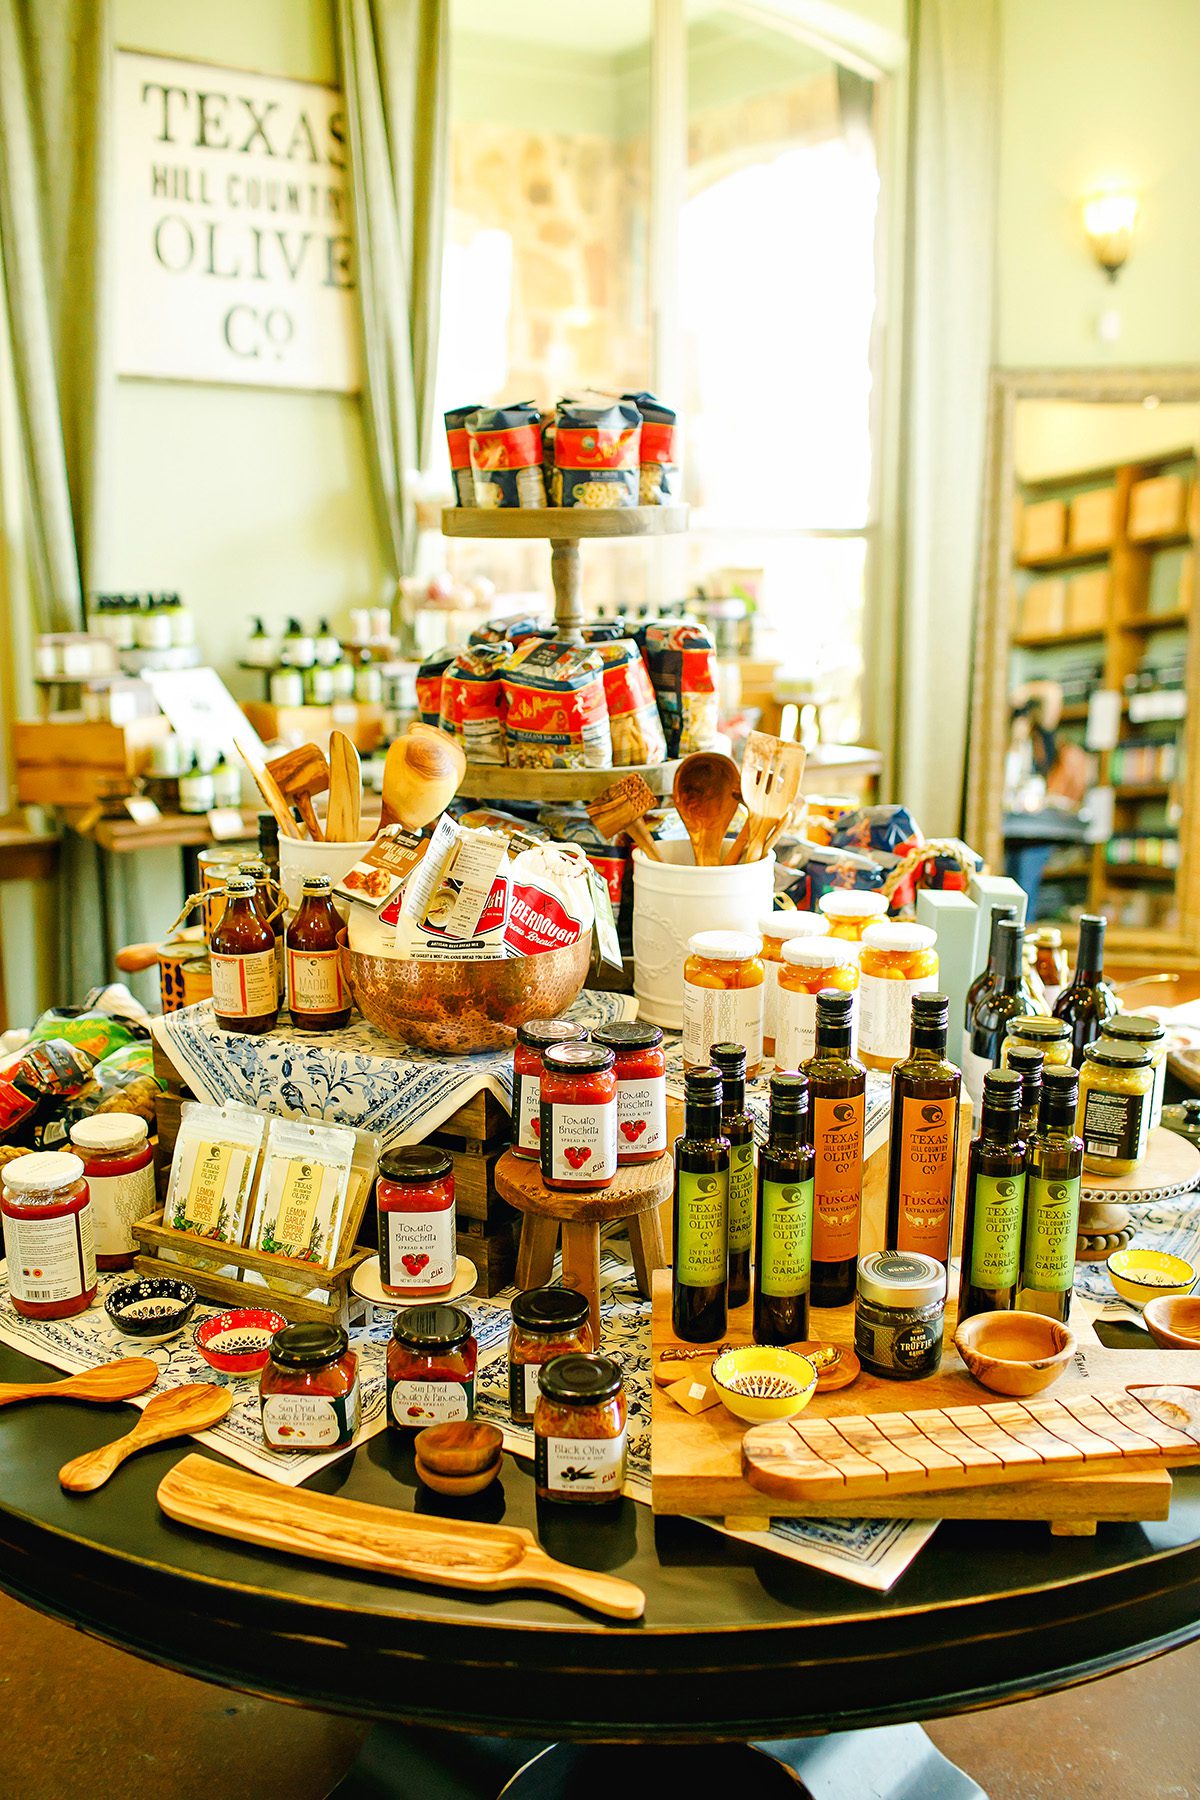 Texas Hill Country Olive Company, Texas Hill Country Olive Oil, Lauren Loves Dripping Springs